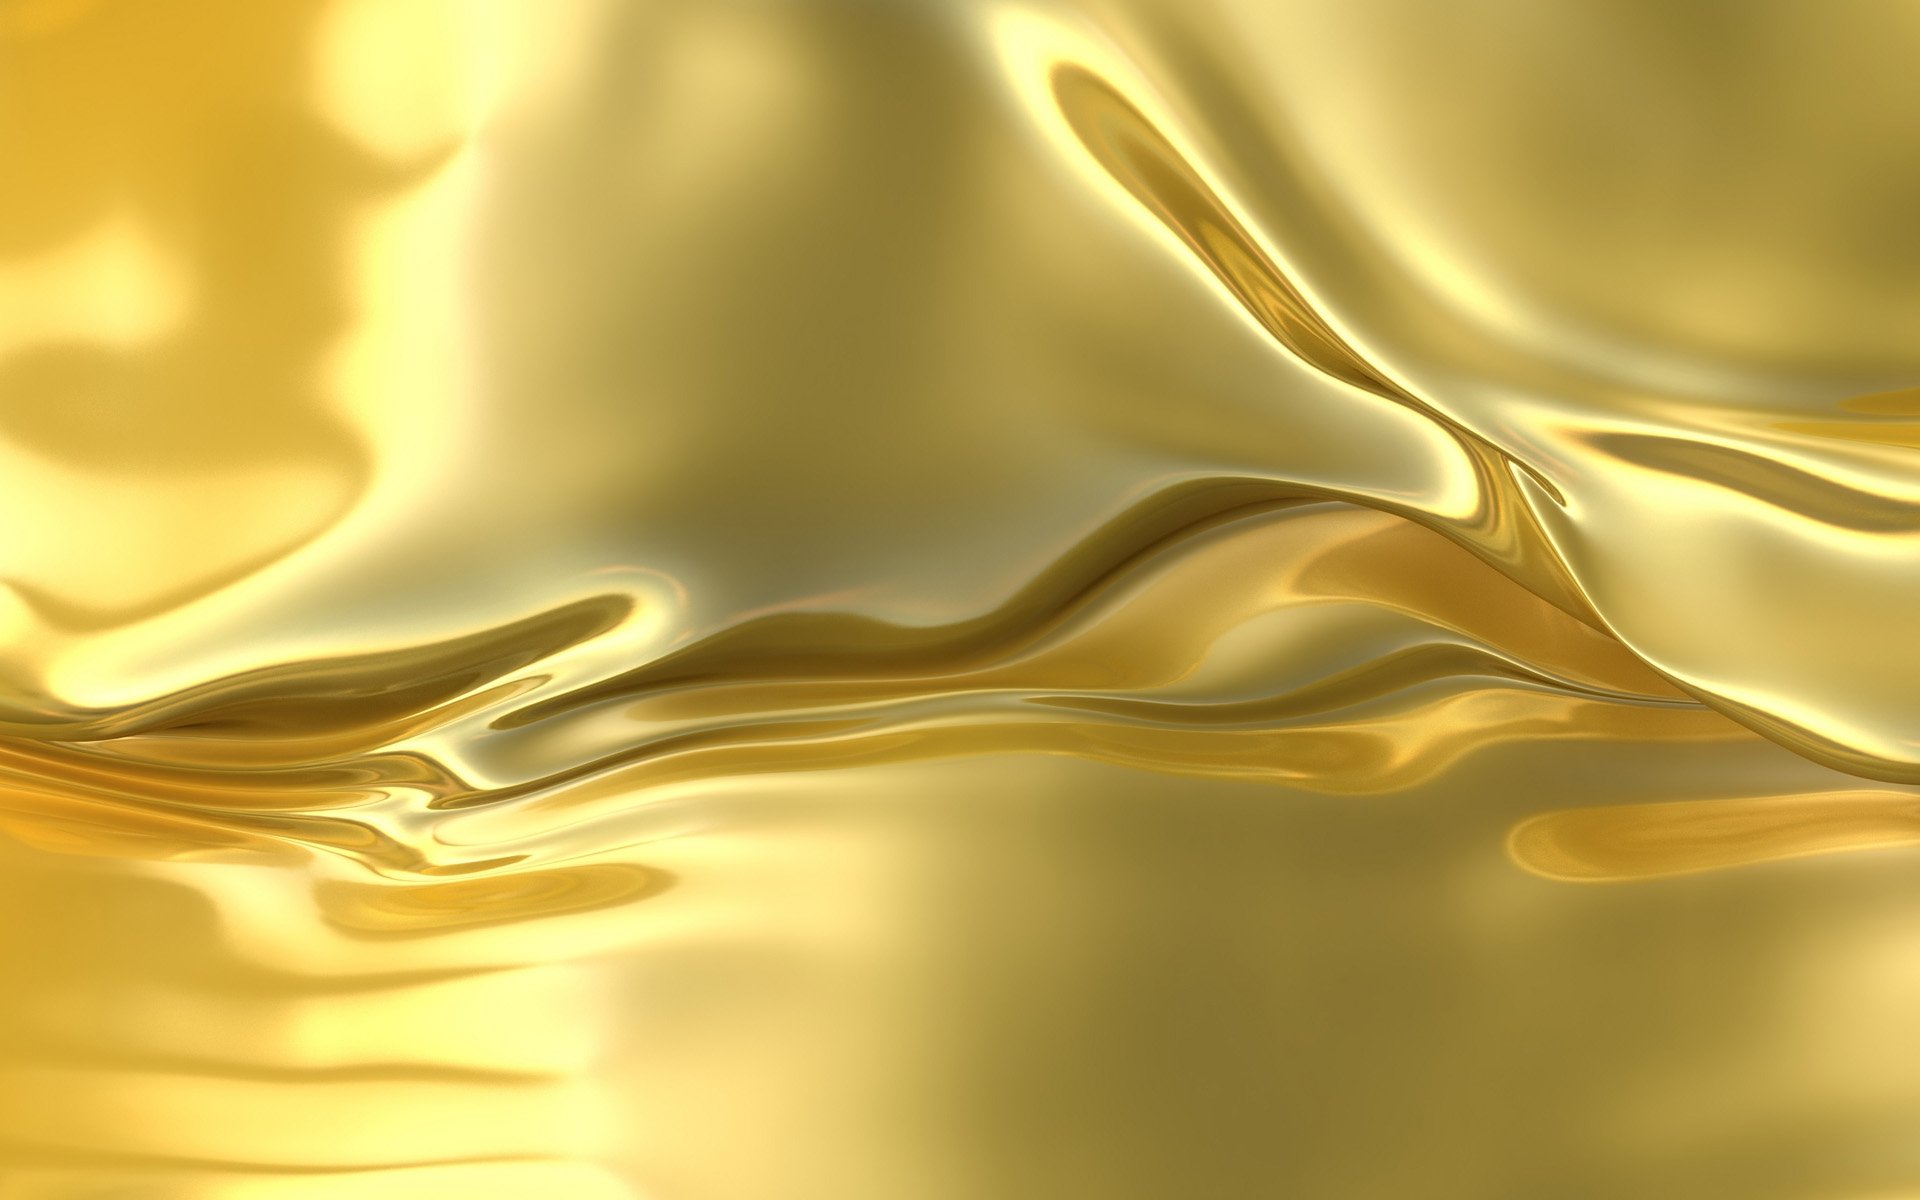 hd wallpapers golden wallpaper ouro abstract gold texture 19201200